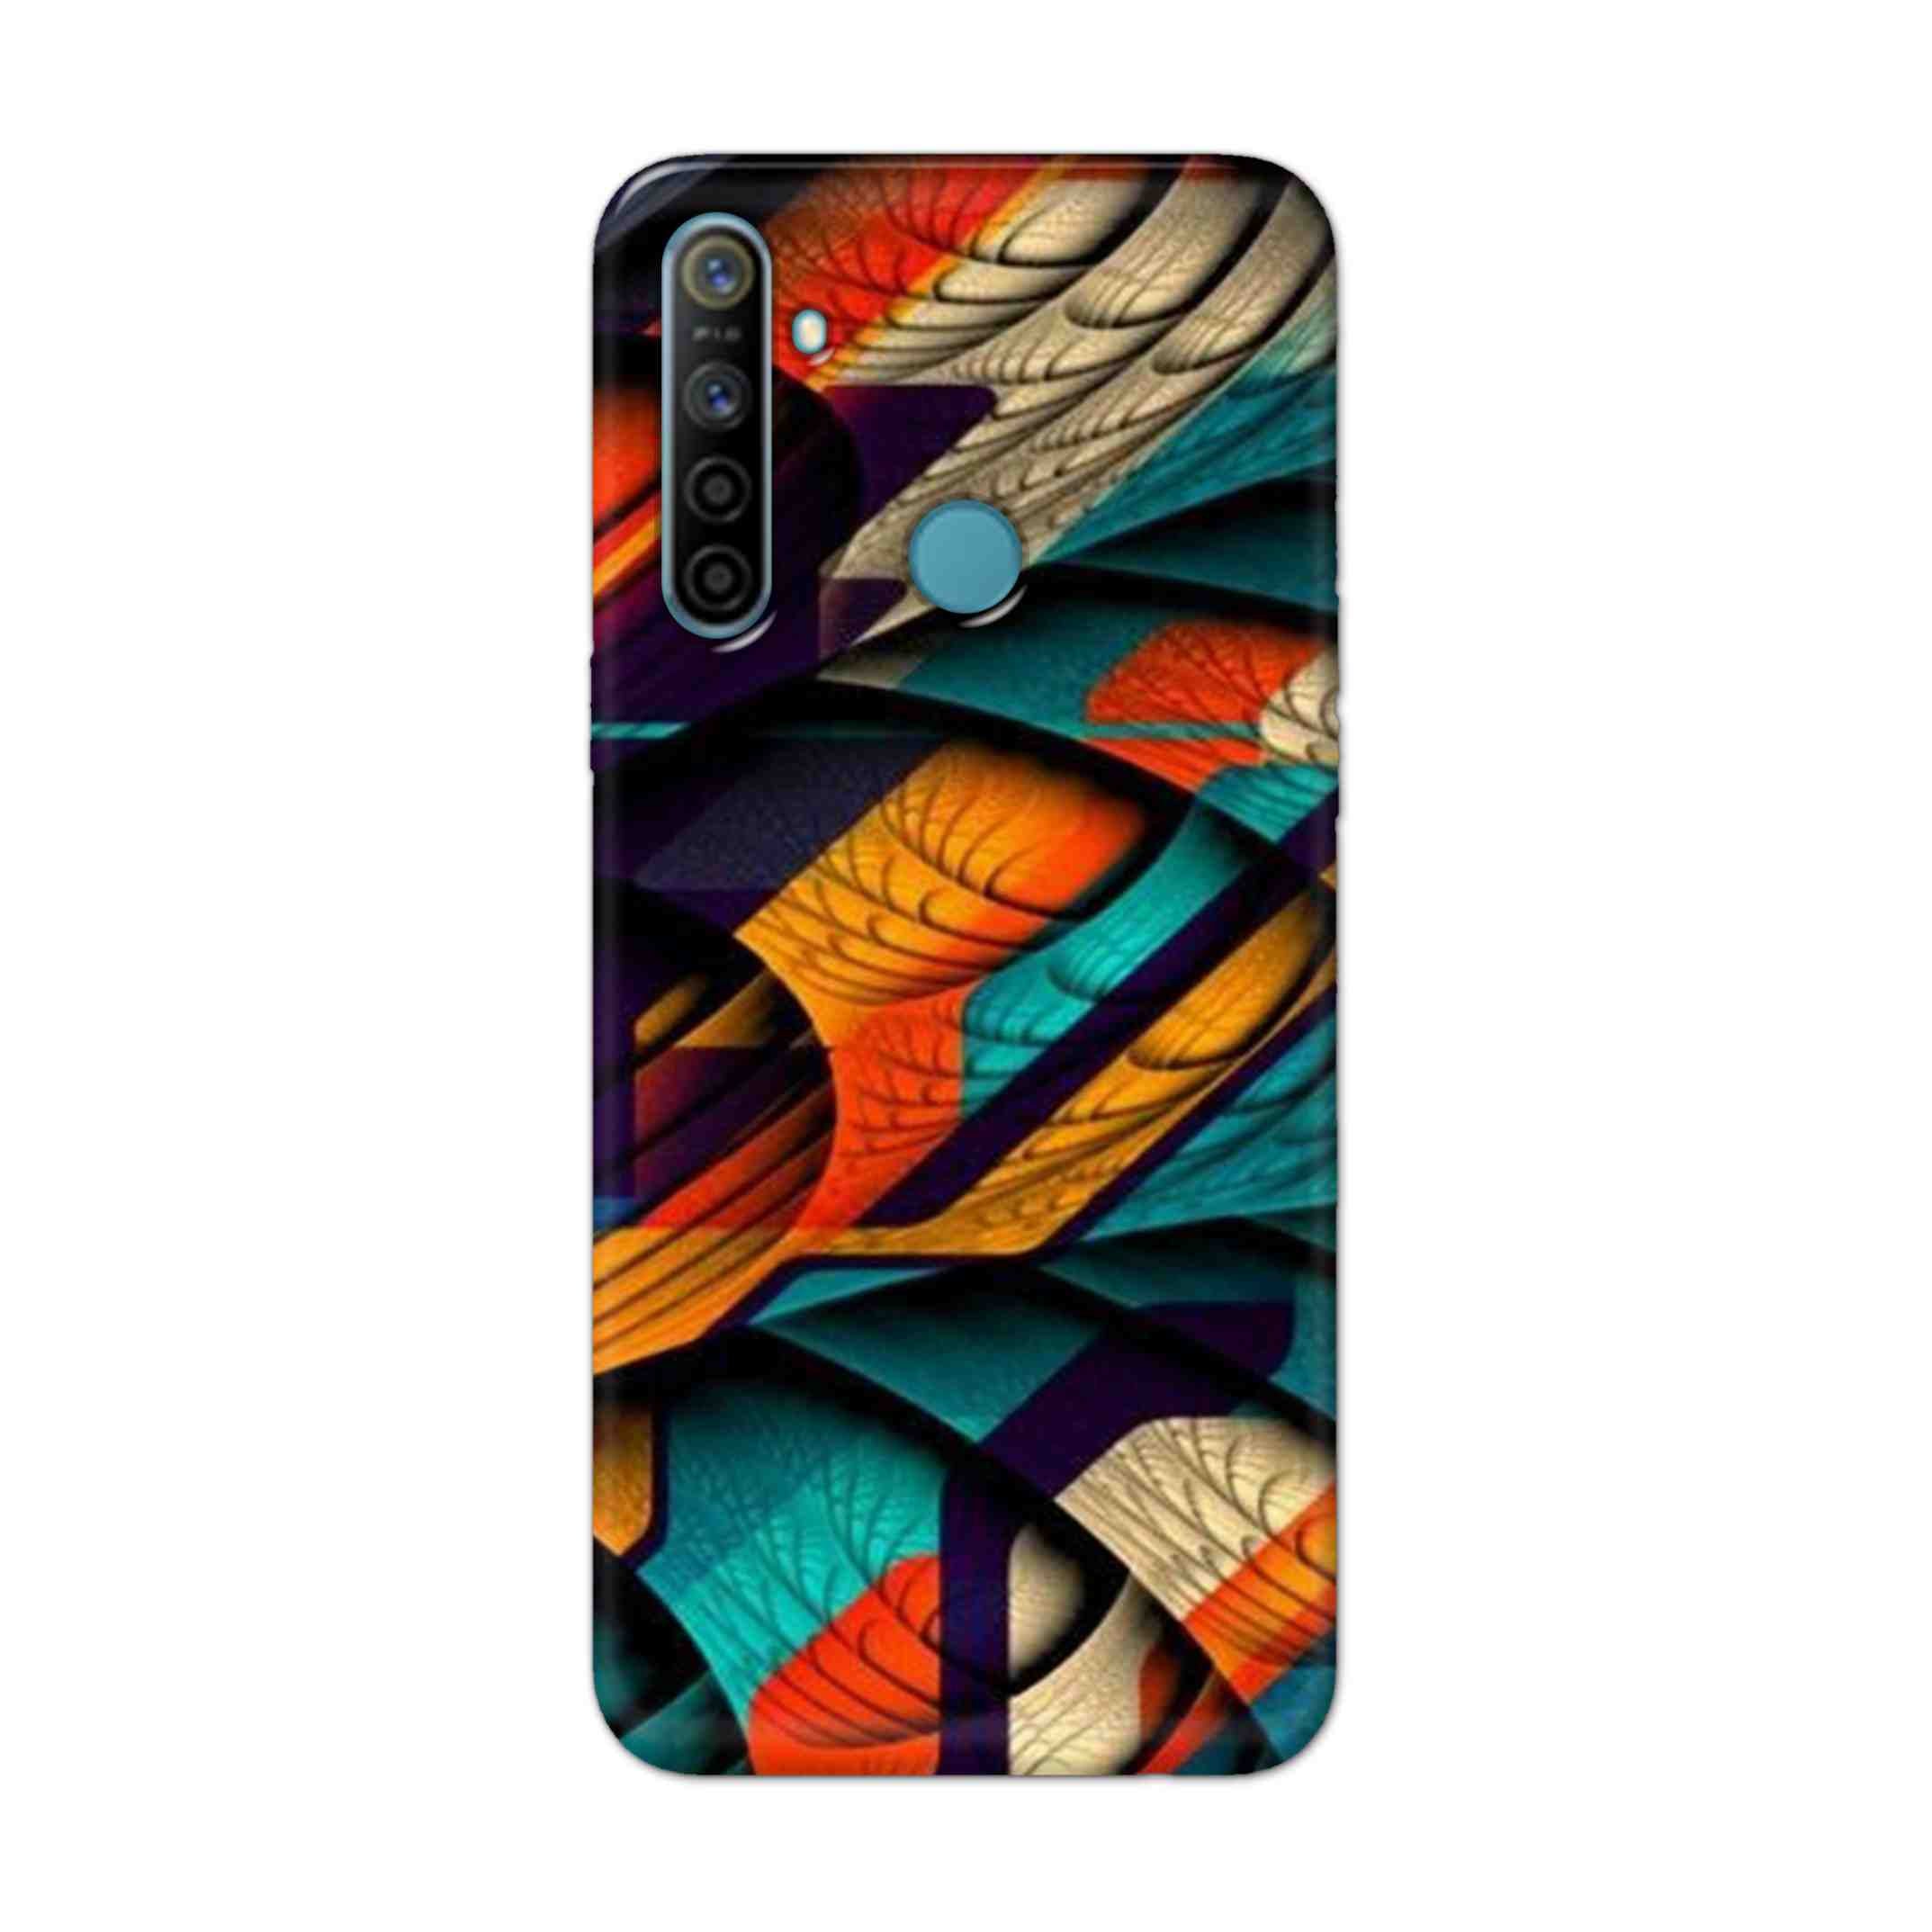 Buy Colour Abstract Hard Back Mobile Phone Case Cover For Realme 5i Online